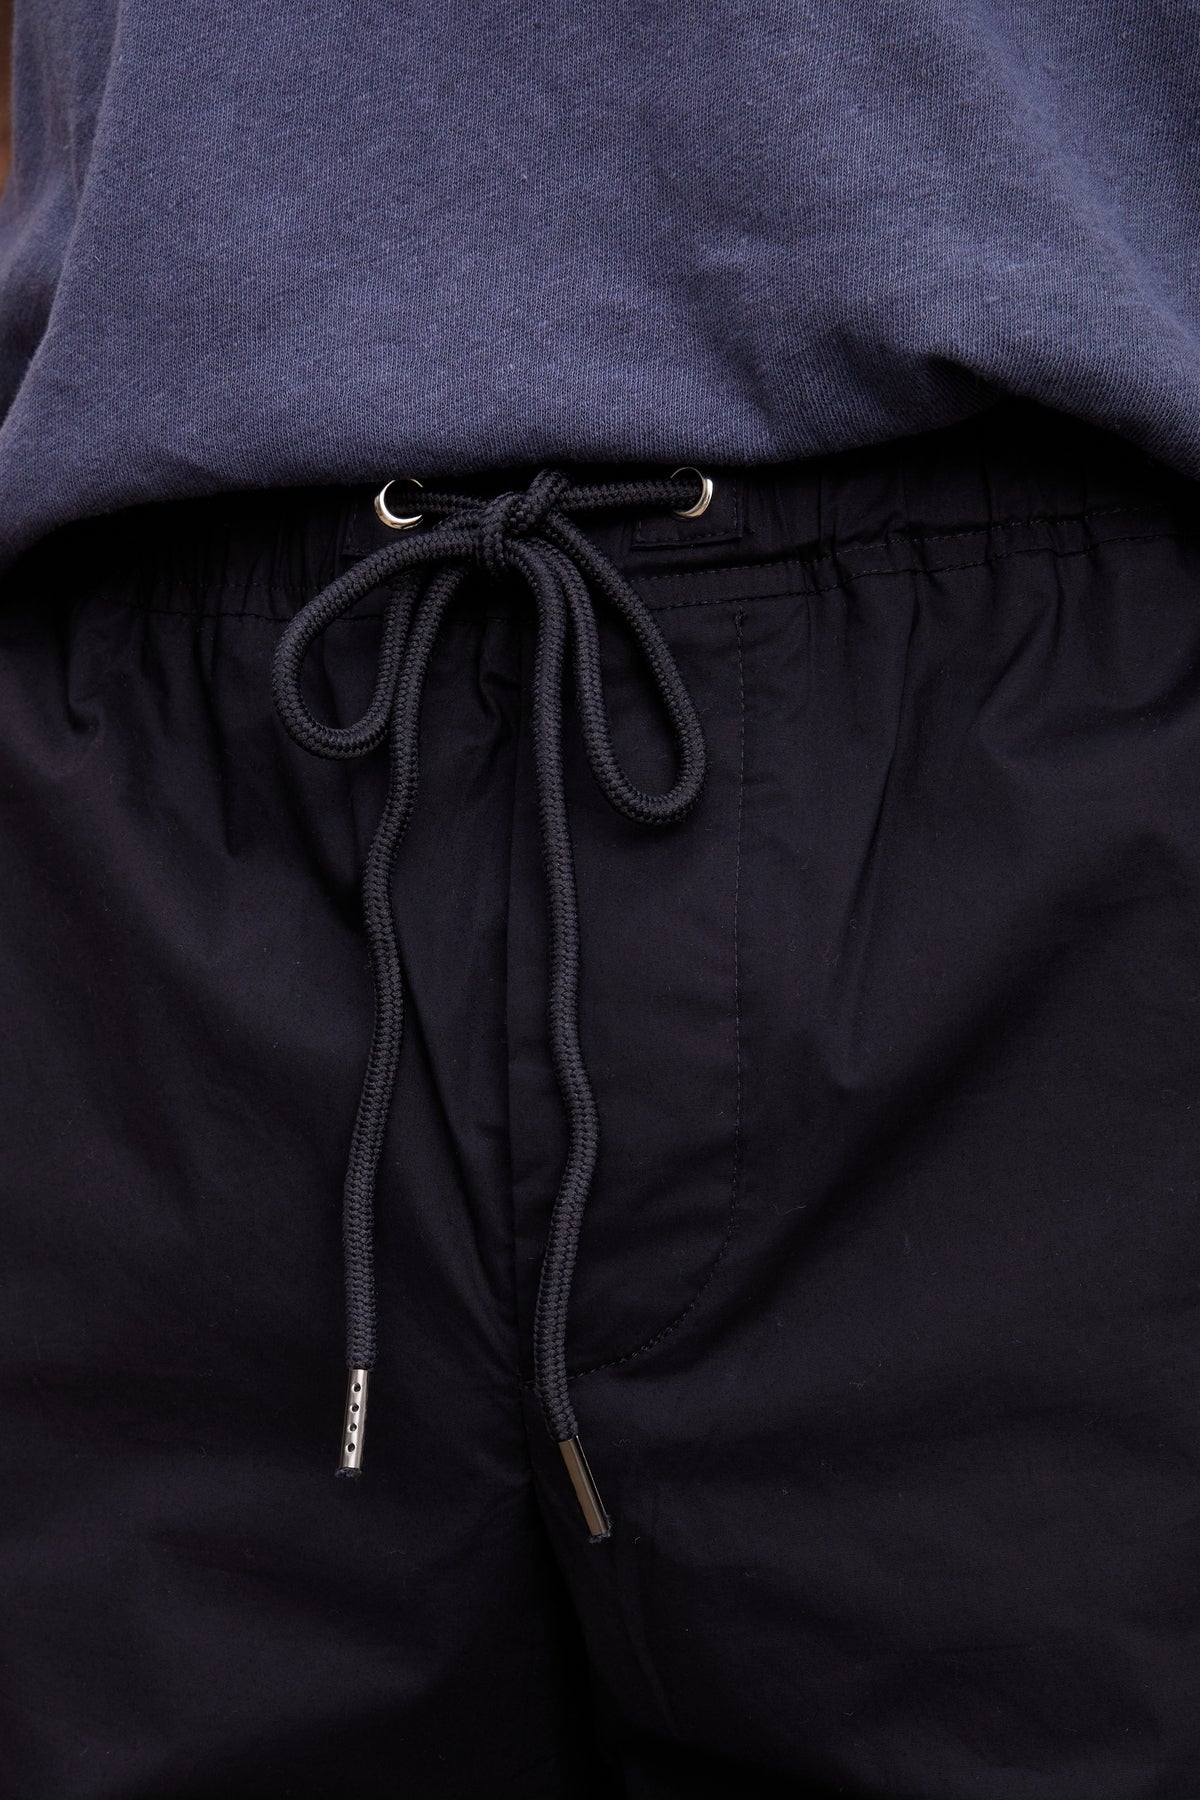   Close-up of a black drawstring with metal aglets on Velvet by Graham & Spencer's LAZARUS JOGGER under a blue sweatshirt. 